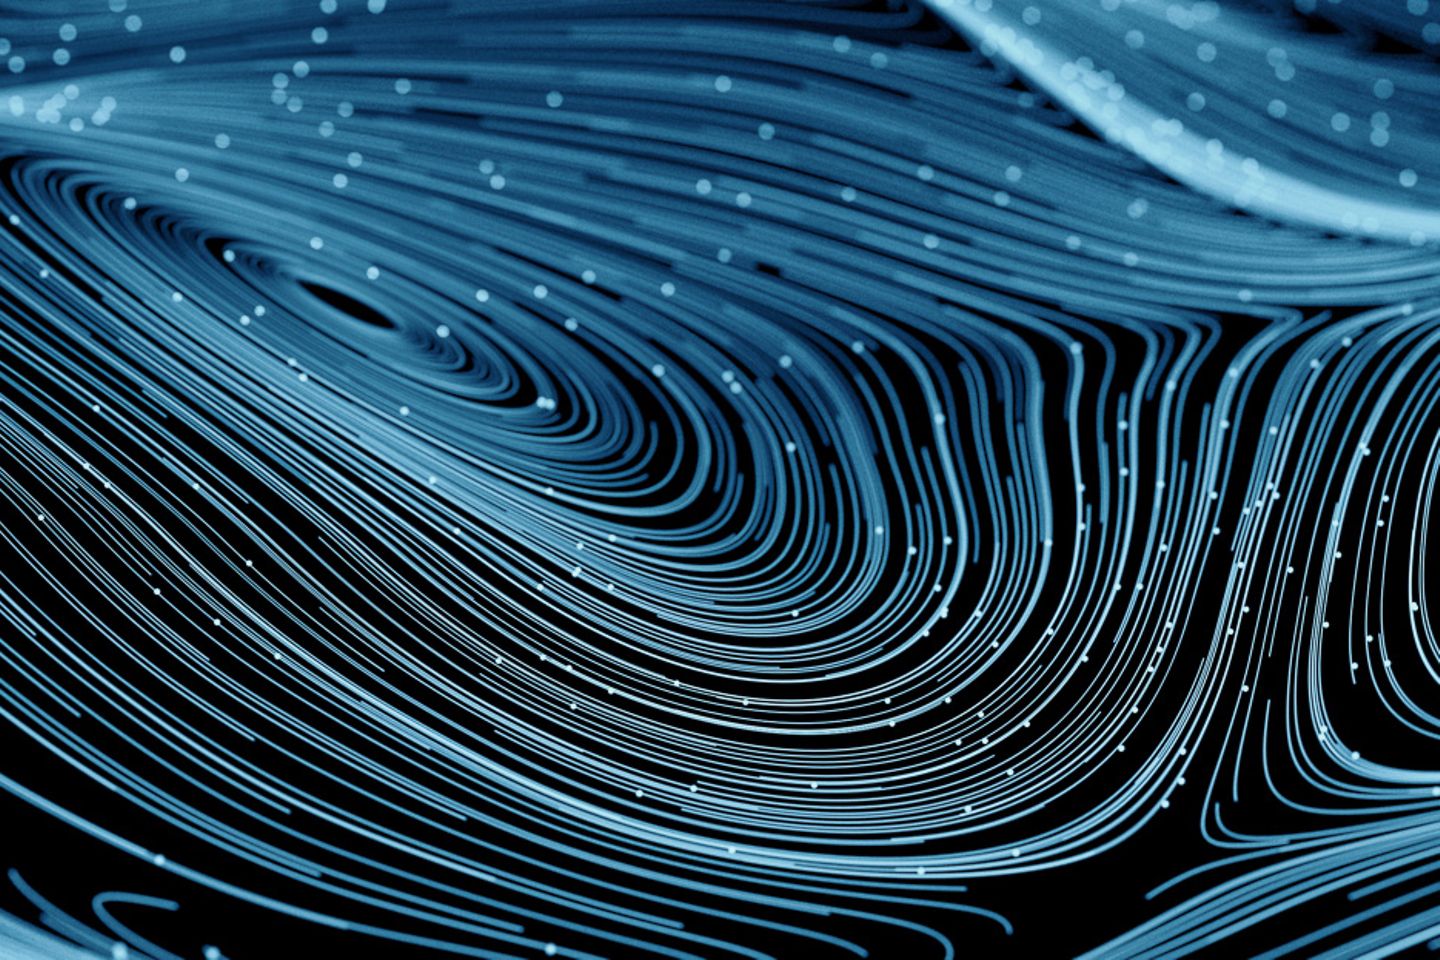 Topographical blue lines against a black background